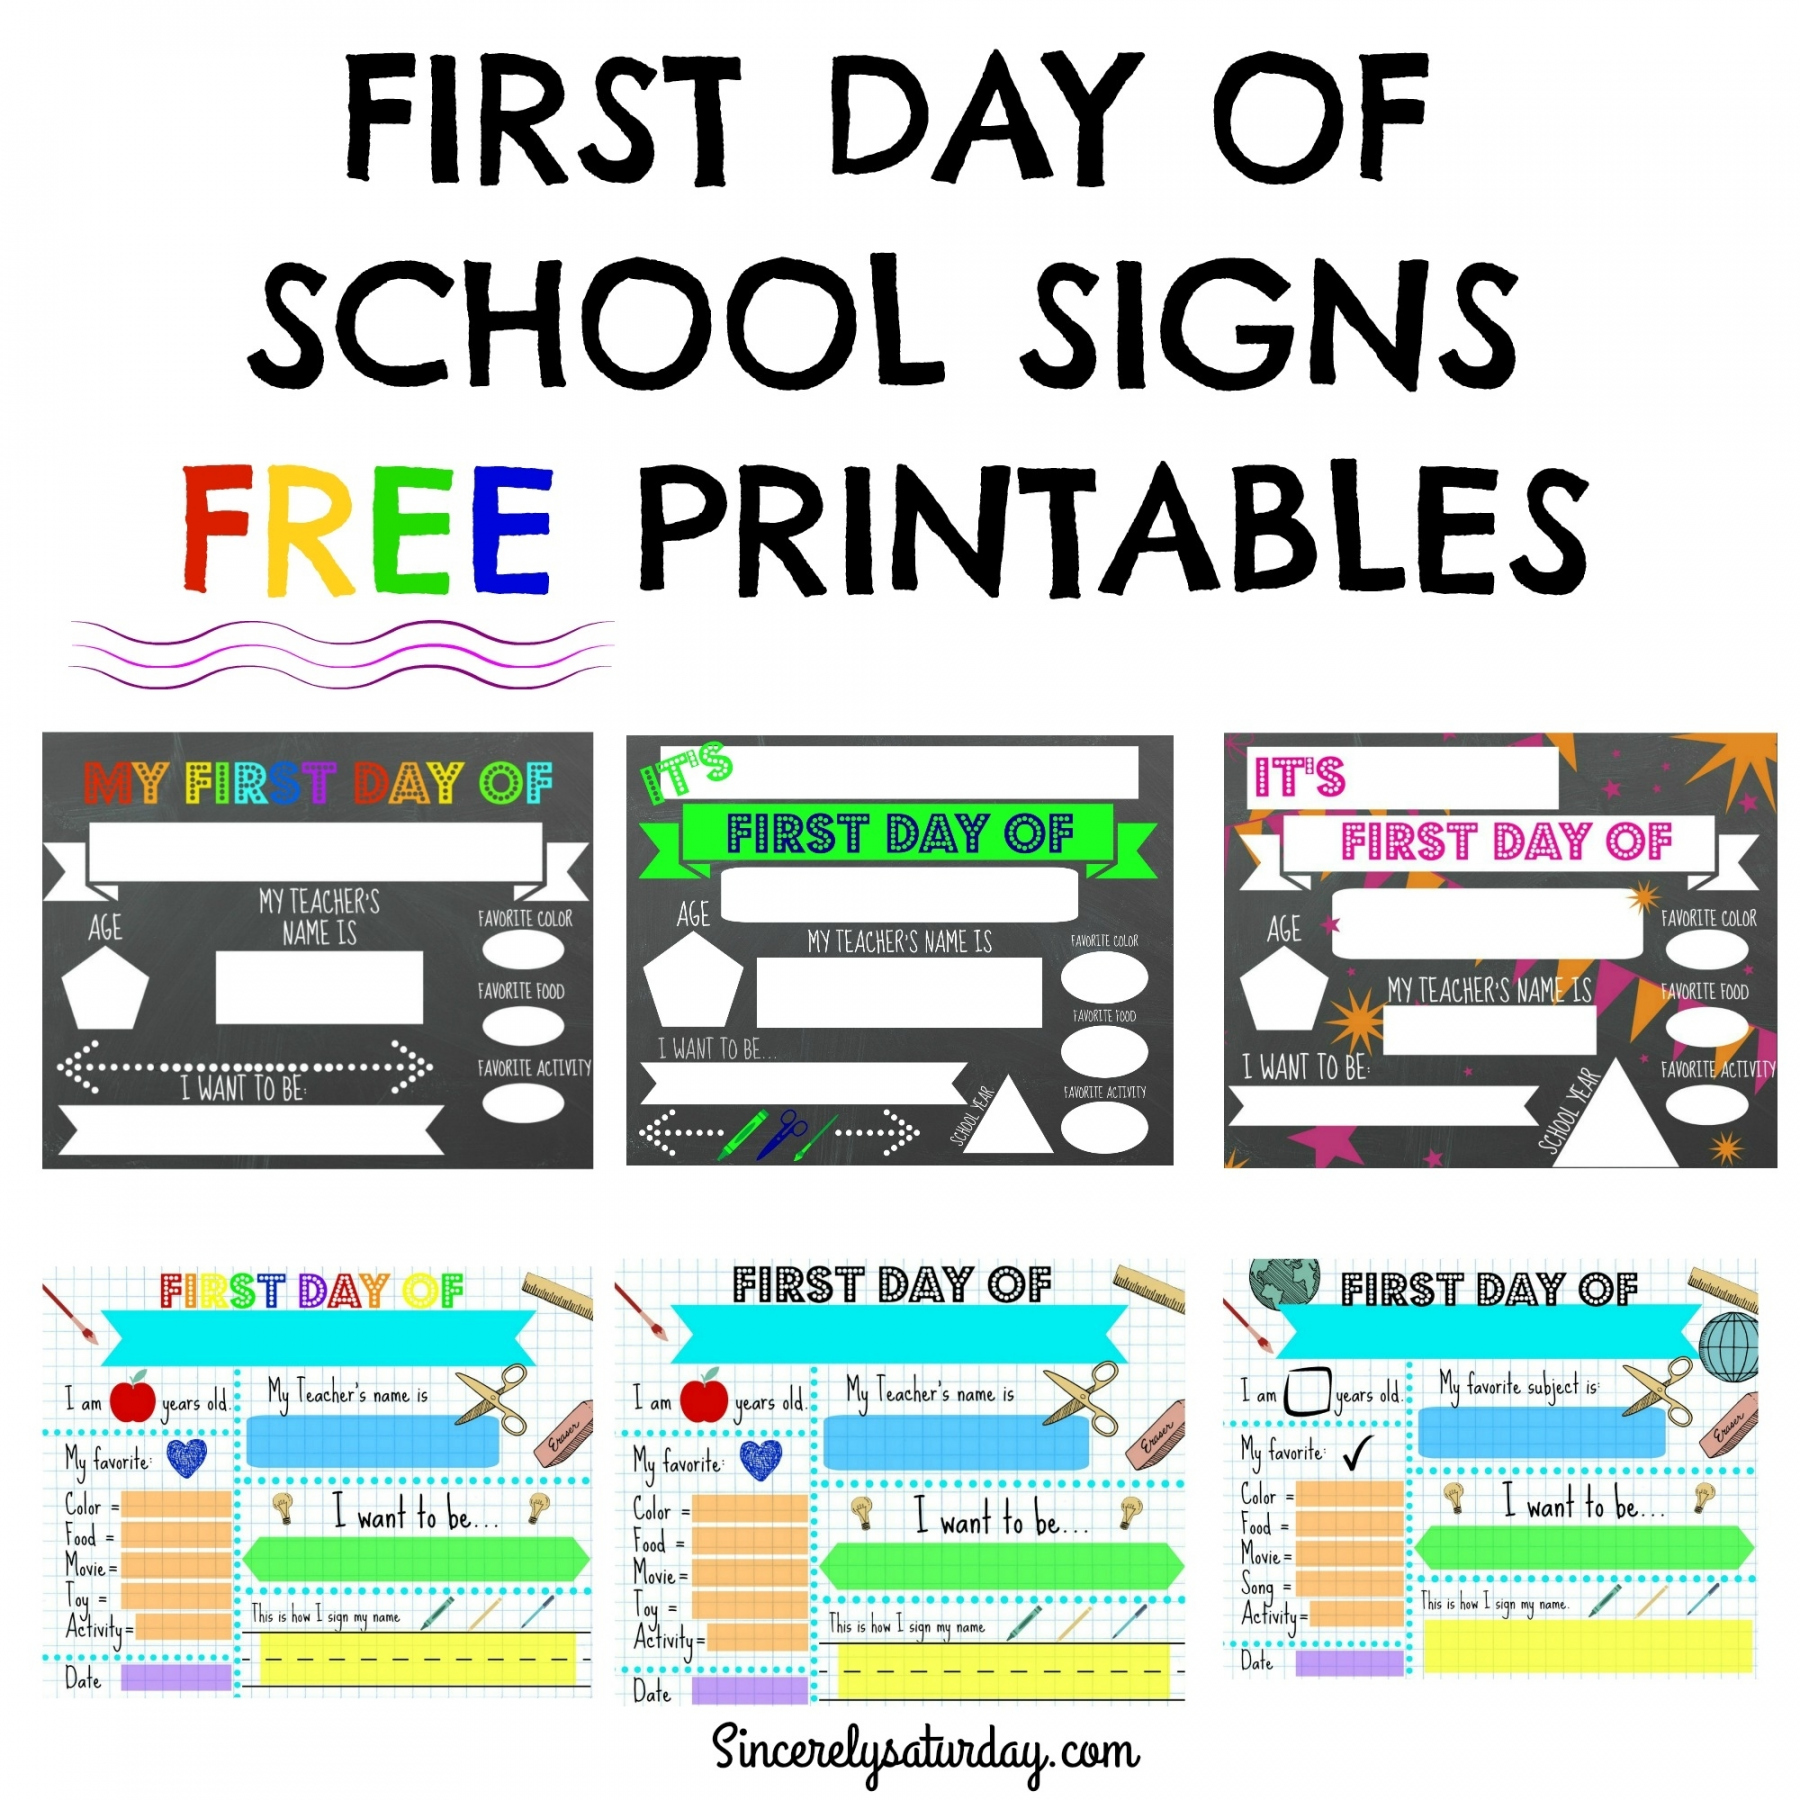 FREE PRINTABLE FIRST DAY OF SCHOOL SIGNS - Sincerely Saturday - FREE Printables - Free Printable First Day Of School Sign